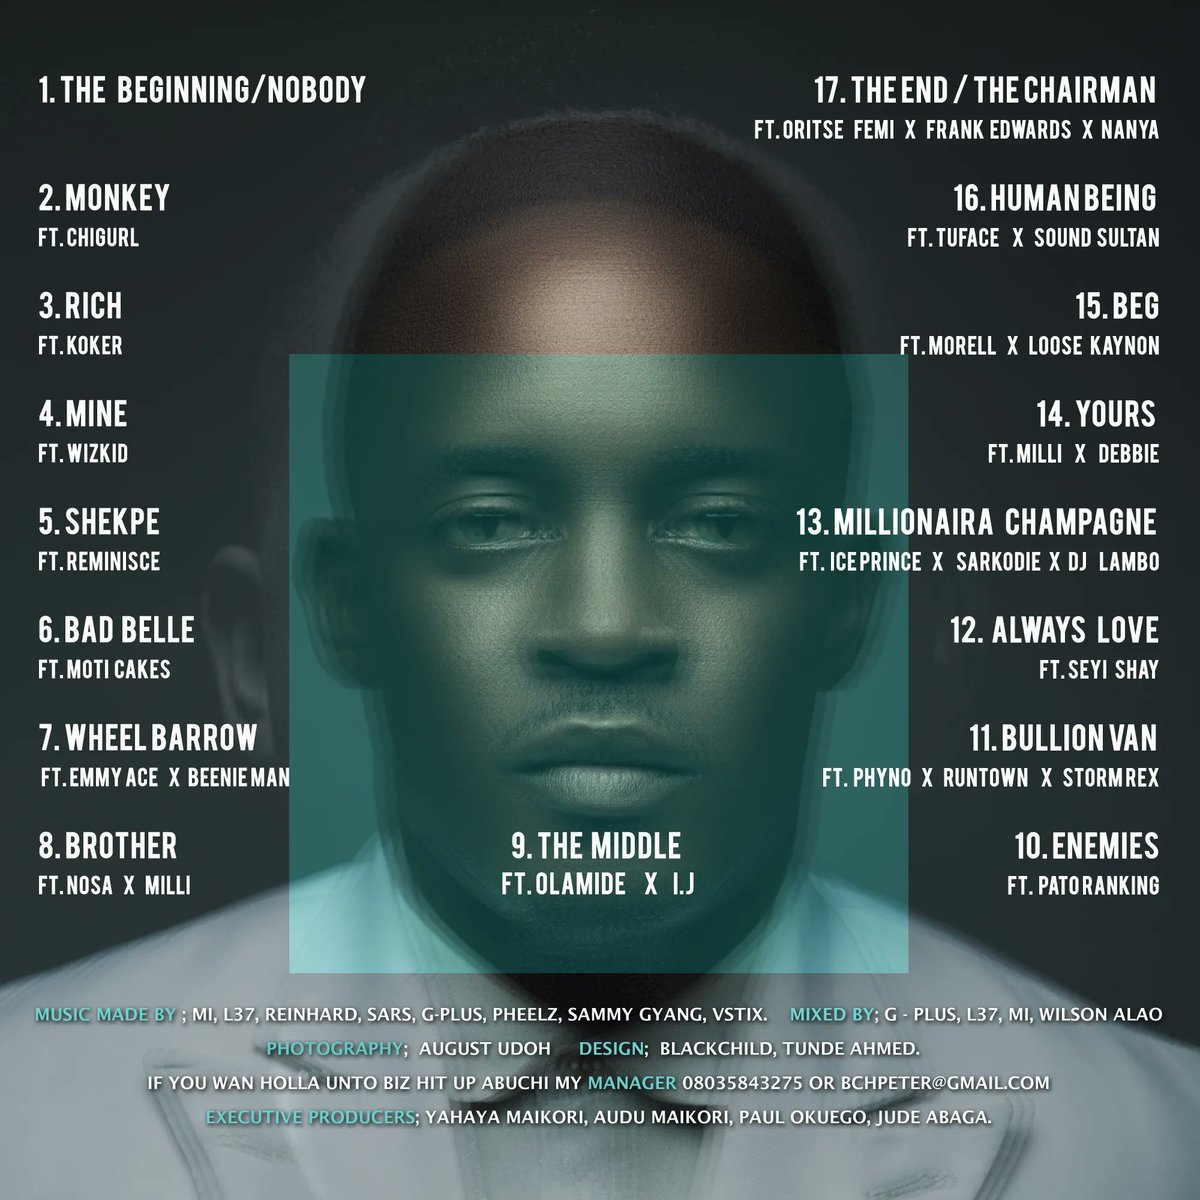 It's the 8th year anniversary of @MI_Abaga's #ChairmanAlbum The most exciting music project I ever worked on. 

The creativity of the tracklisting still blows my mind.